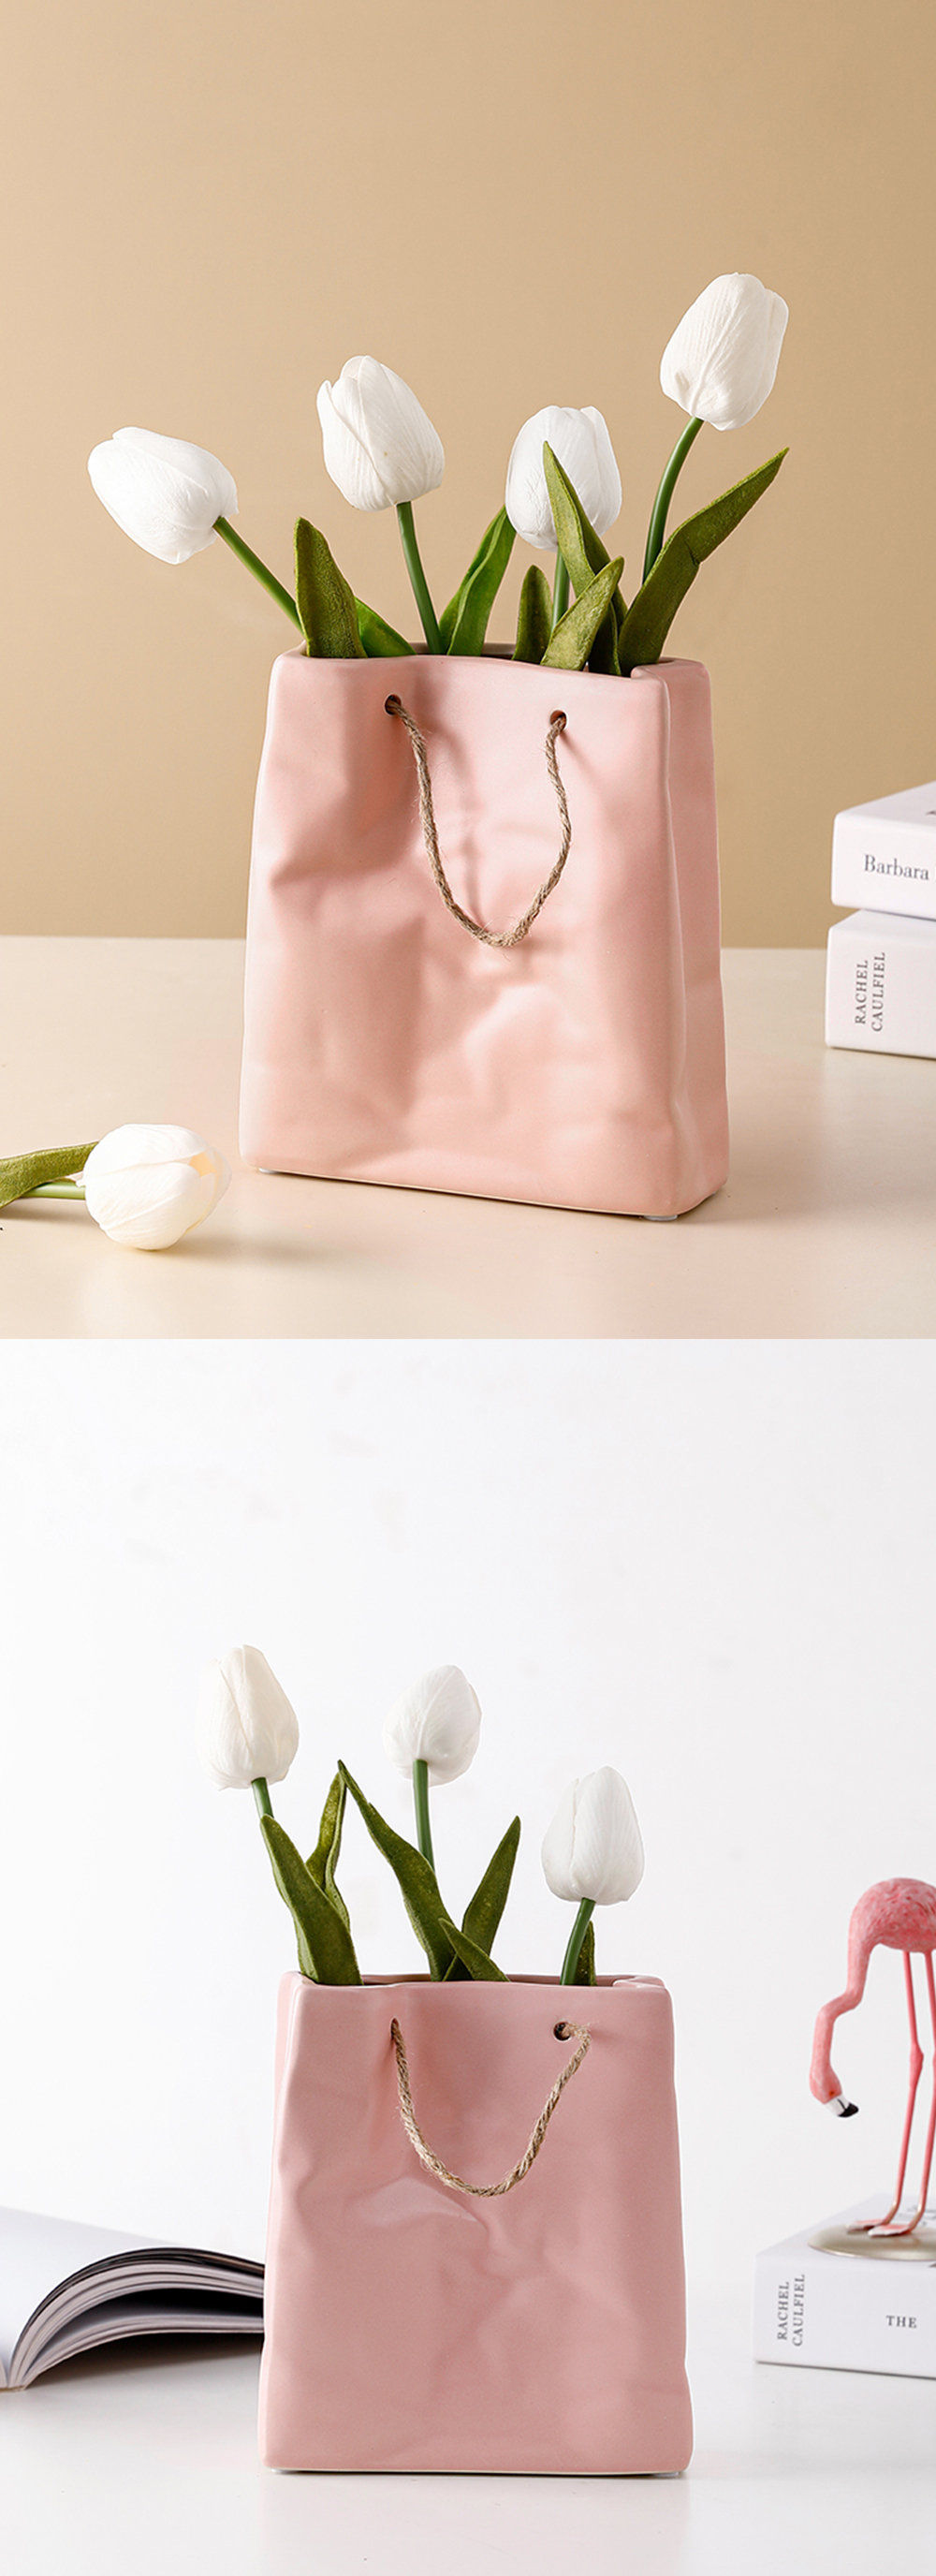 Gift Bag Vase - Ceramic - Pink - Blue - 3 Colors - 2 Sizes from Apollo Box